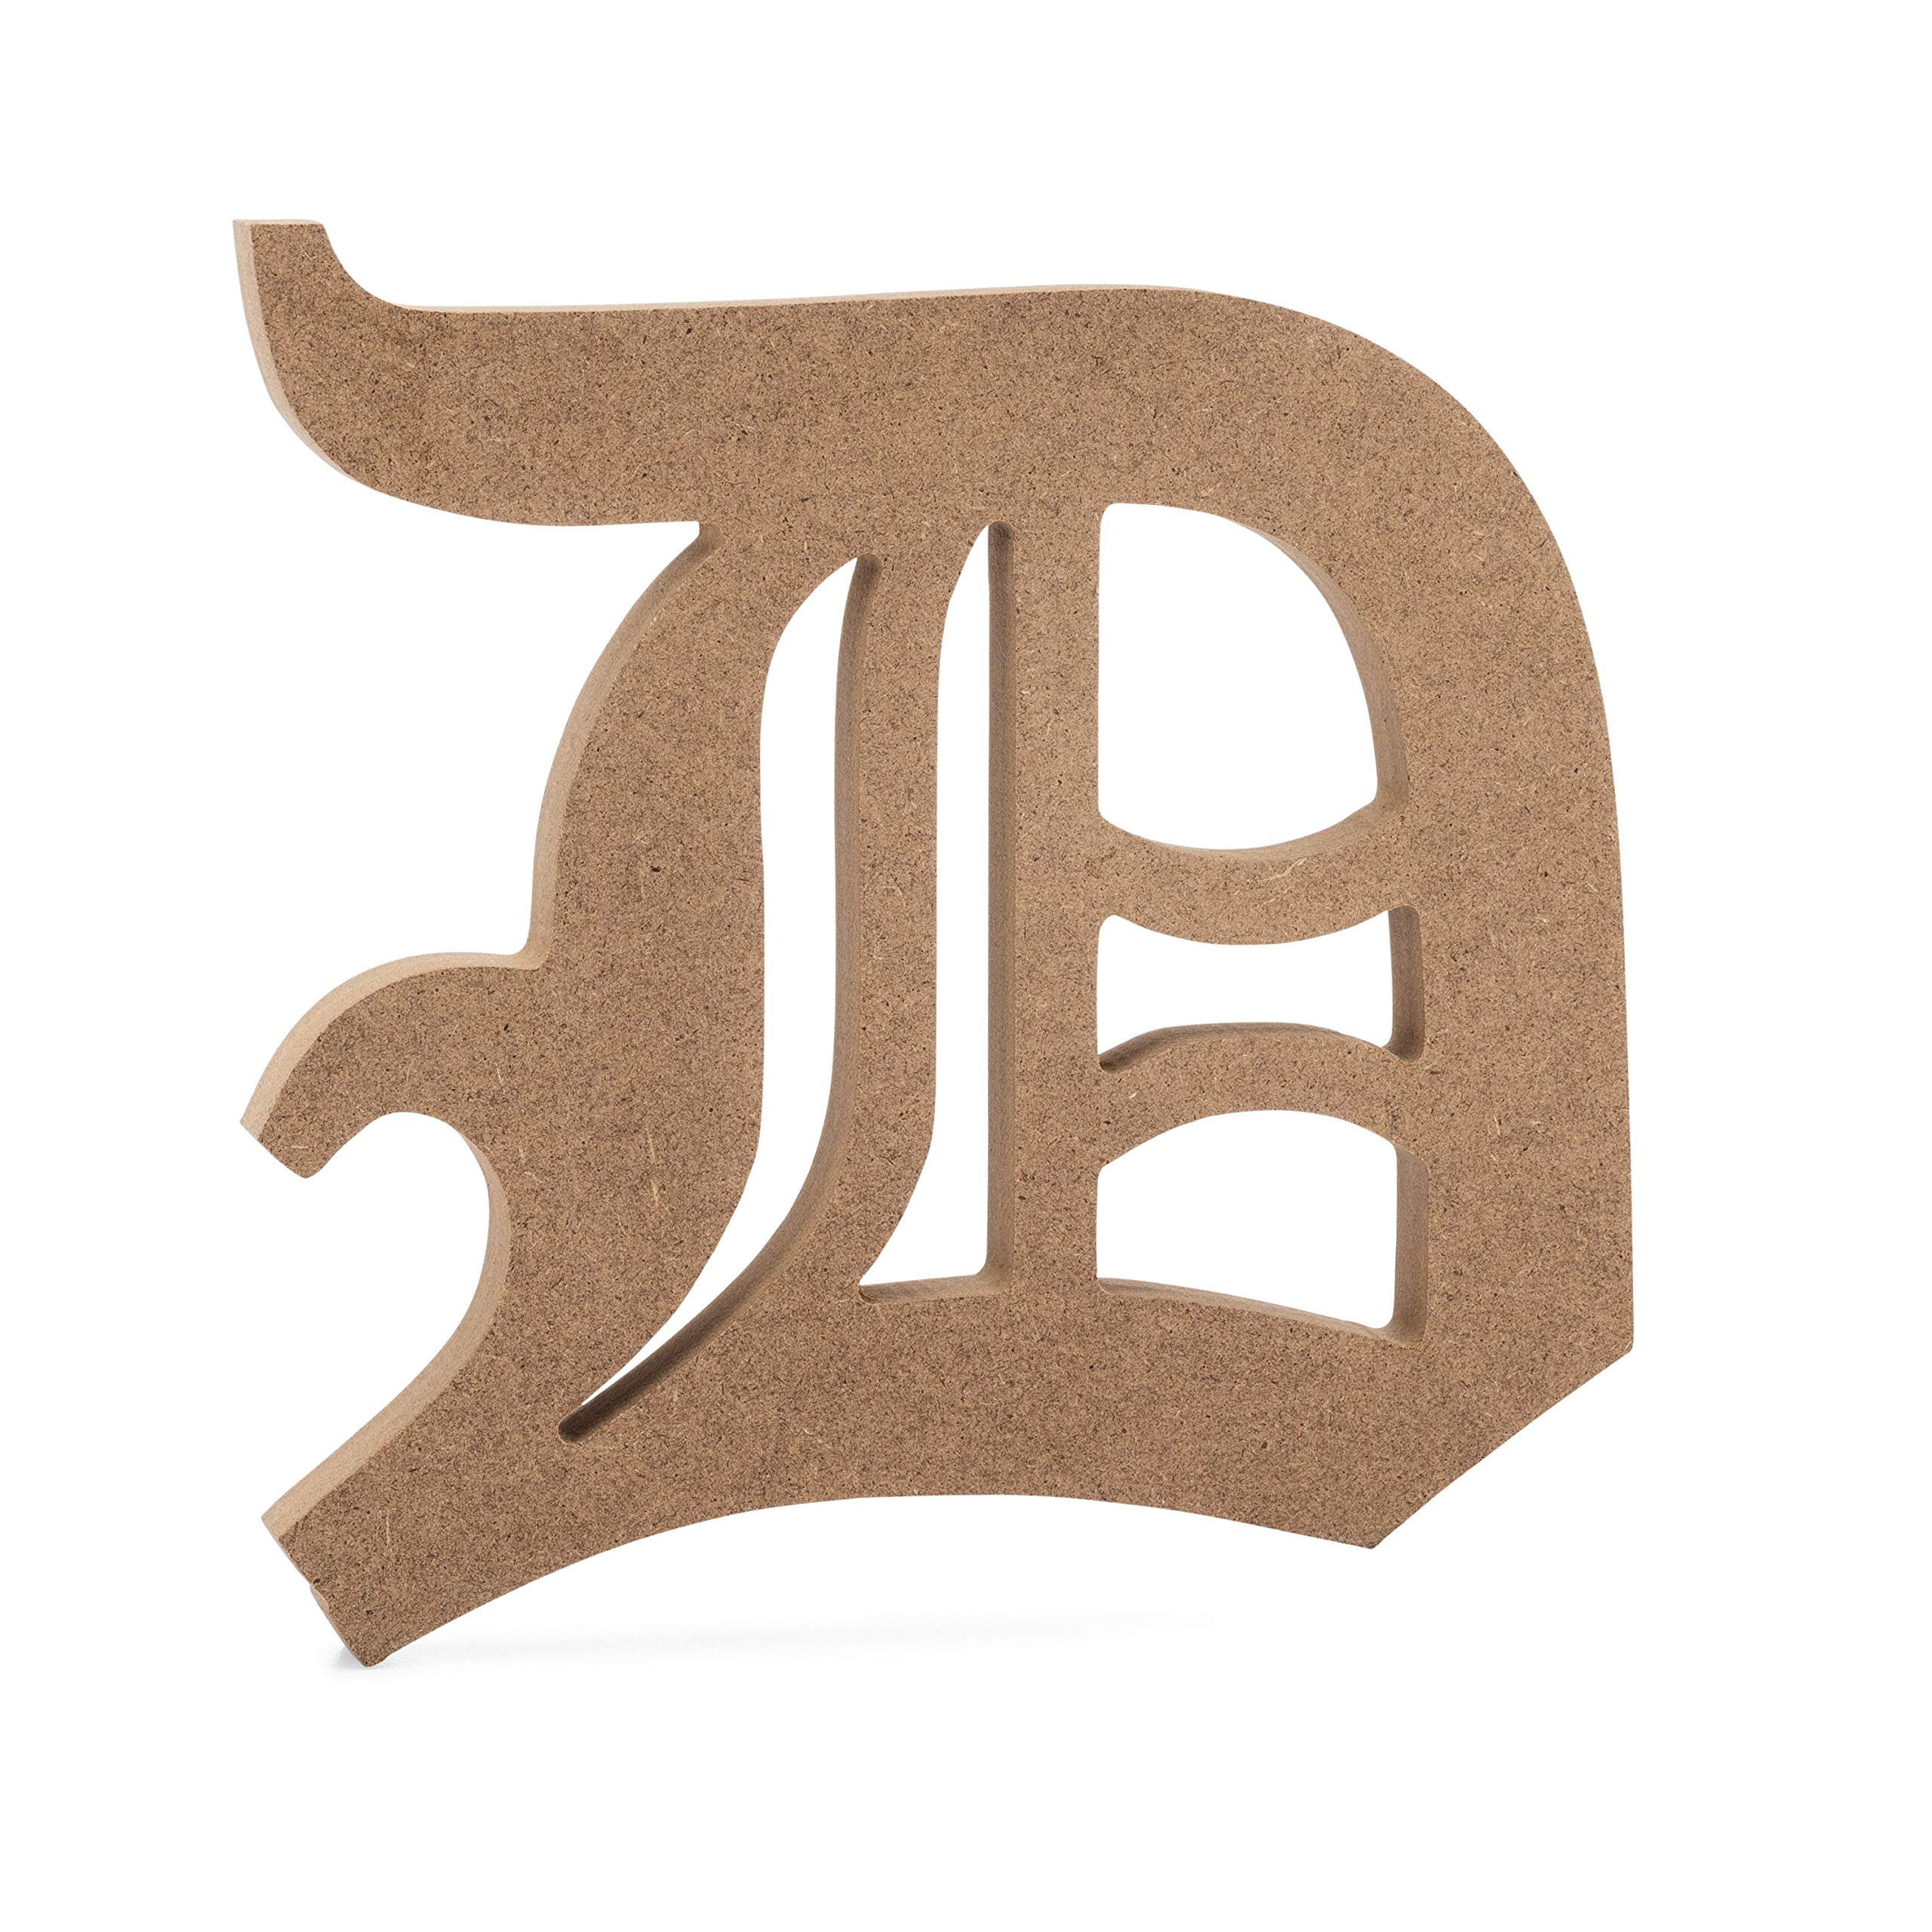 6 Old English Wooden Letter D - JoePaul's Crafts Premium MDF Wood Wall Letters (6 inch, D) 6 inch